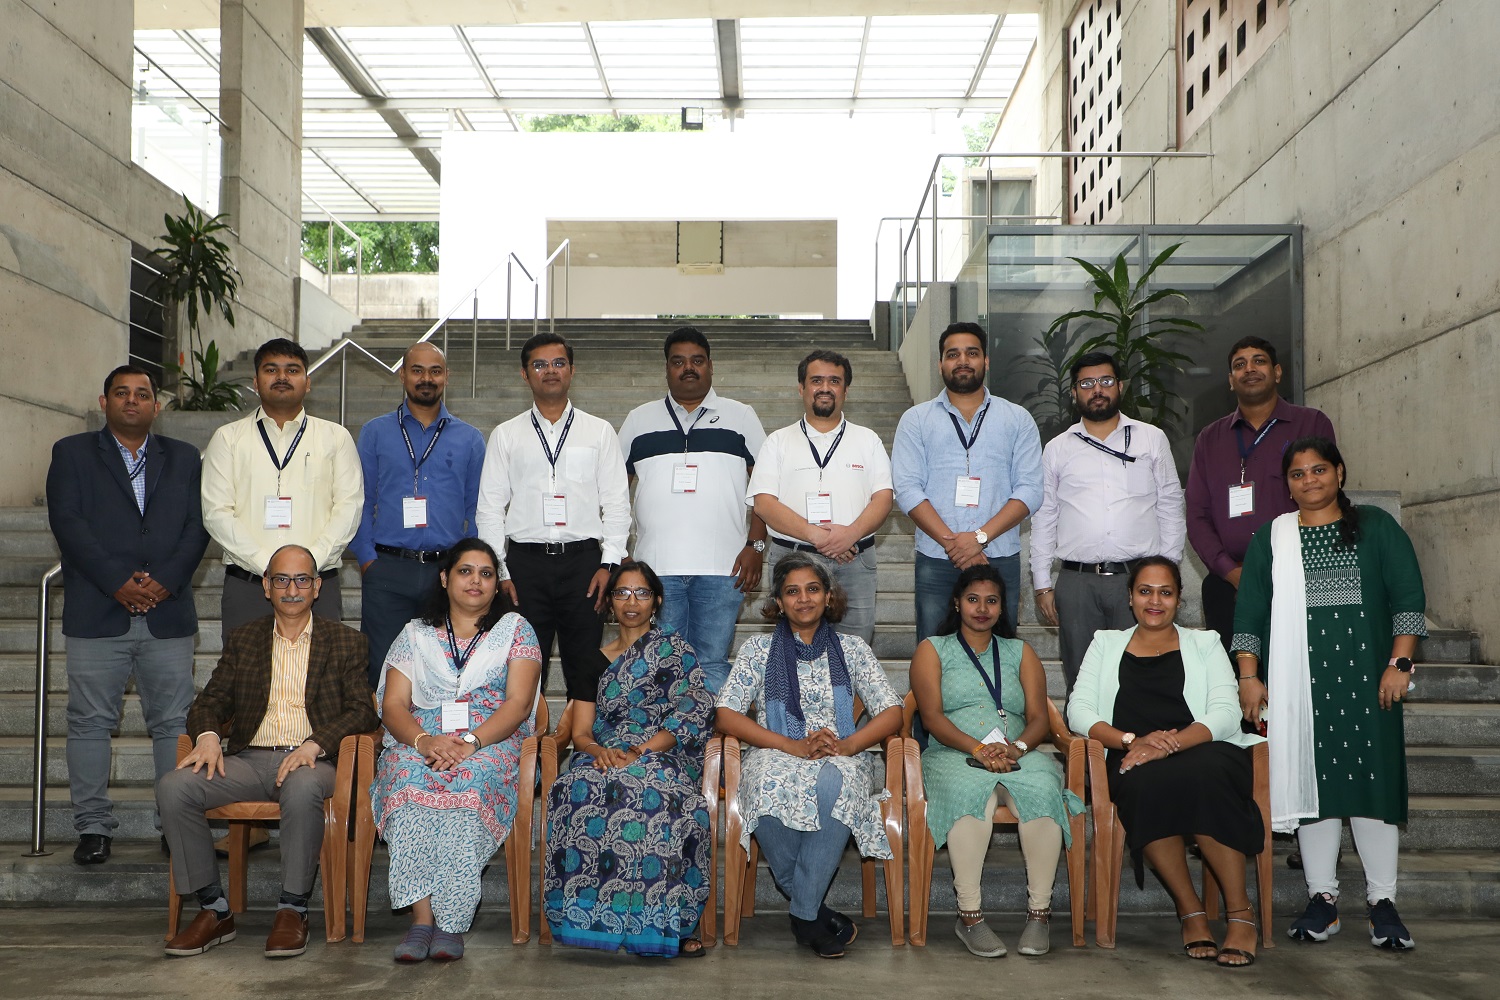 Participants of the Programme from Workplace Conflict - An Opportunity for Growth on November 24, 2022. Programme Director Prof. Hema Swaminathan is seen with them.